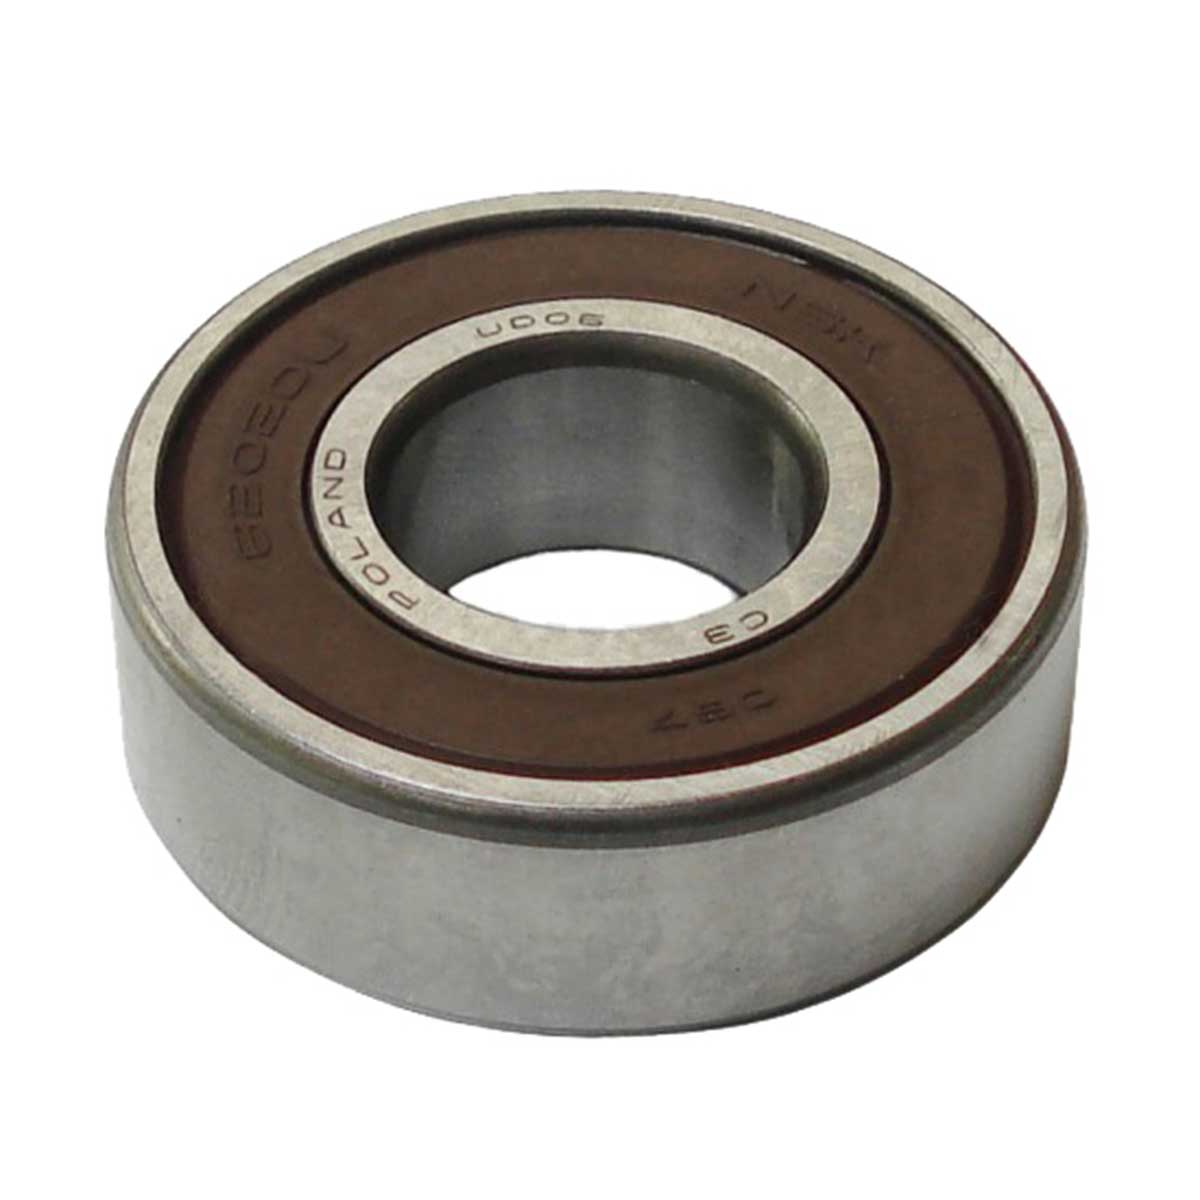 SMALL END BEARING FOR HUSQVARNA  K750 K760 SAWS/OTHERS LITTLE END BEARING 